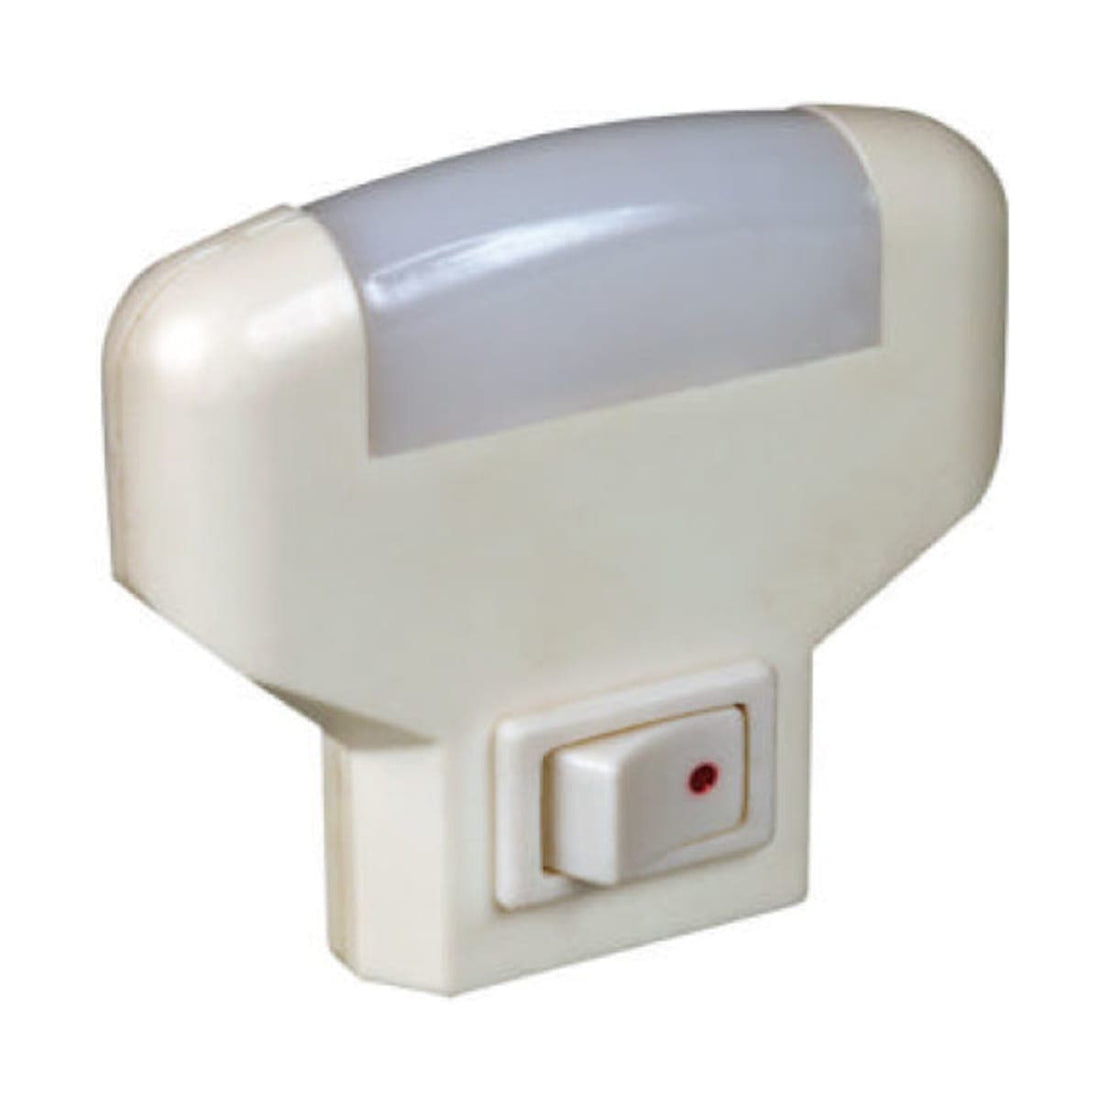 LED NIGHT LIGHT WITH ON/OFF SWITCH - ON - best price from Maltashopper.com BR420450369